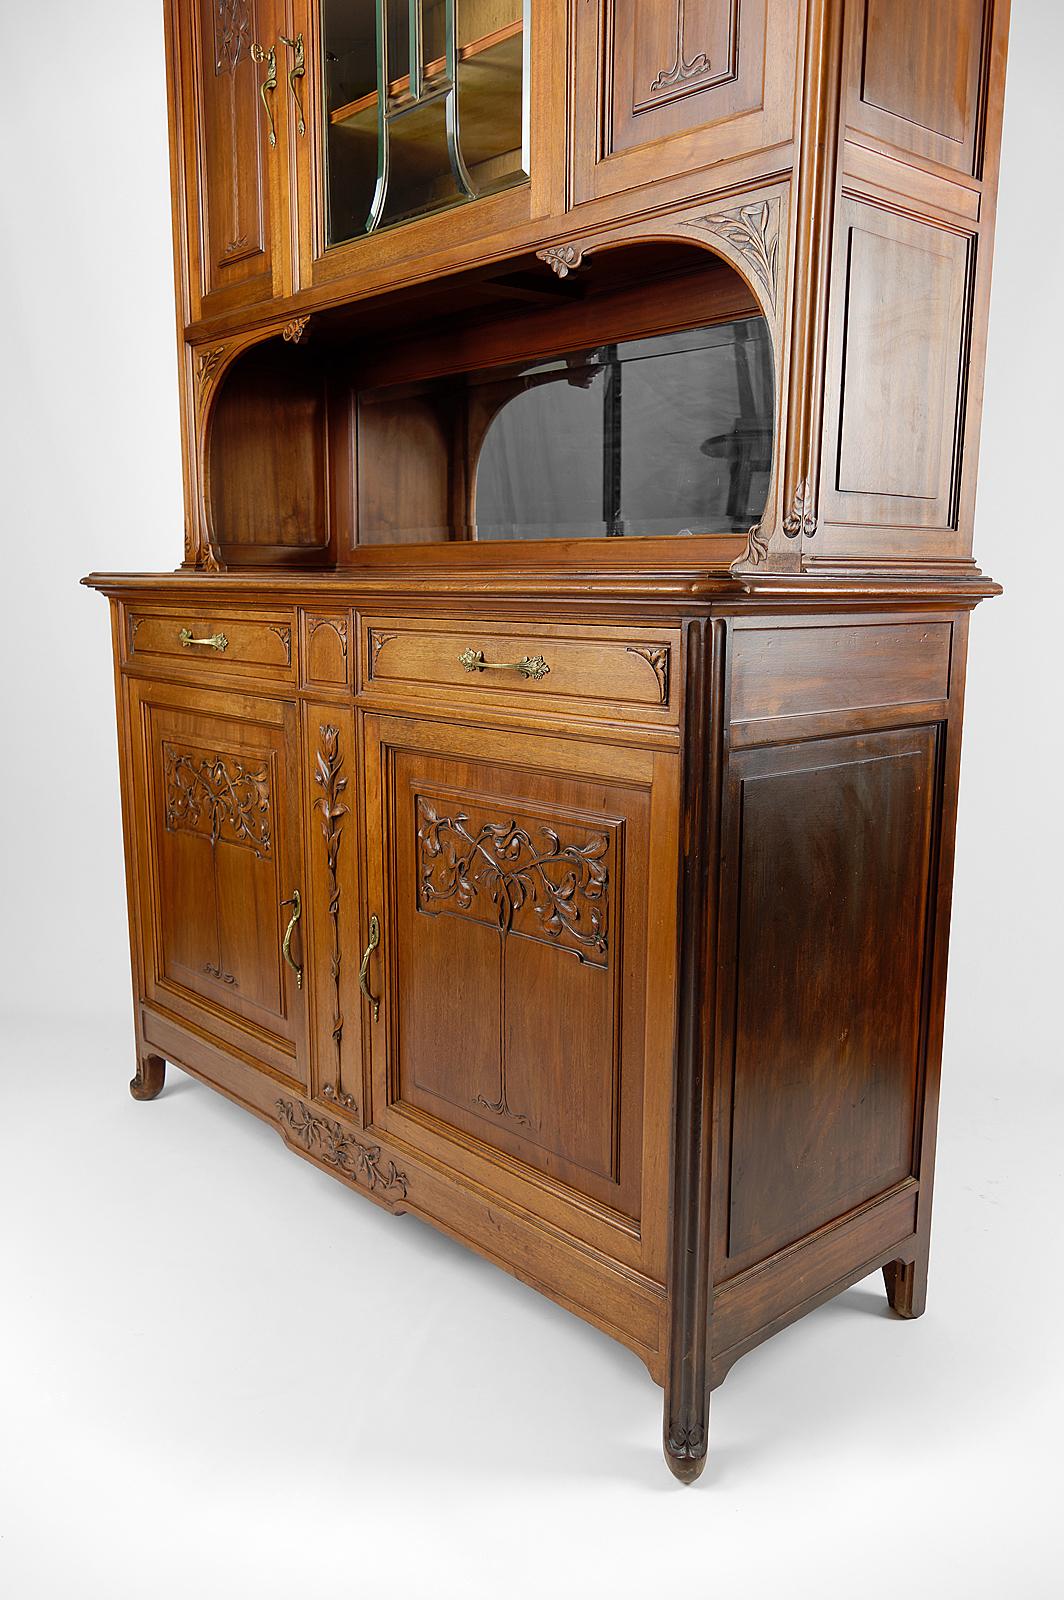 French Art Nouveau Sideboard in Carved Walnut with Stained Glass, circa 1910 For Sale 2